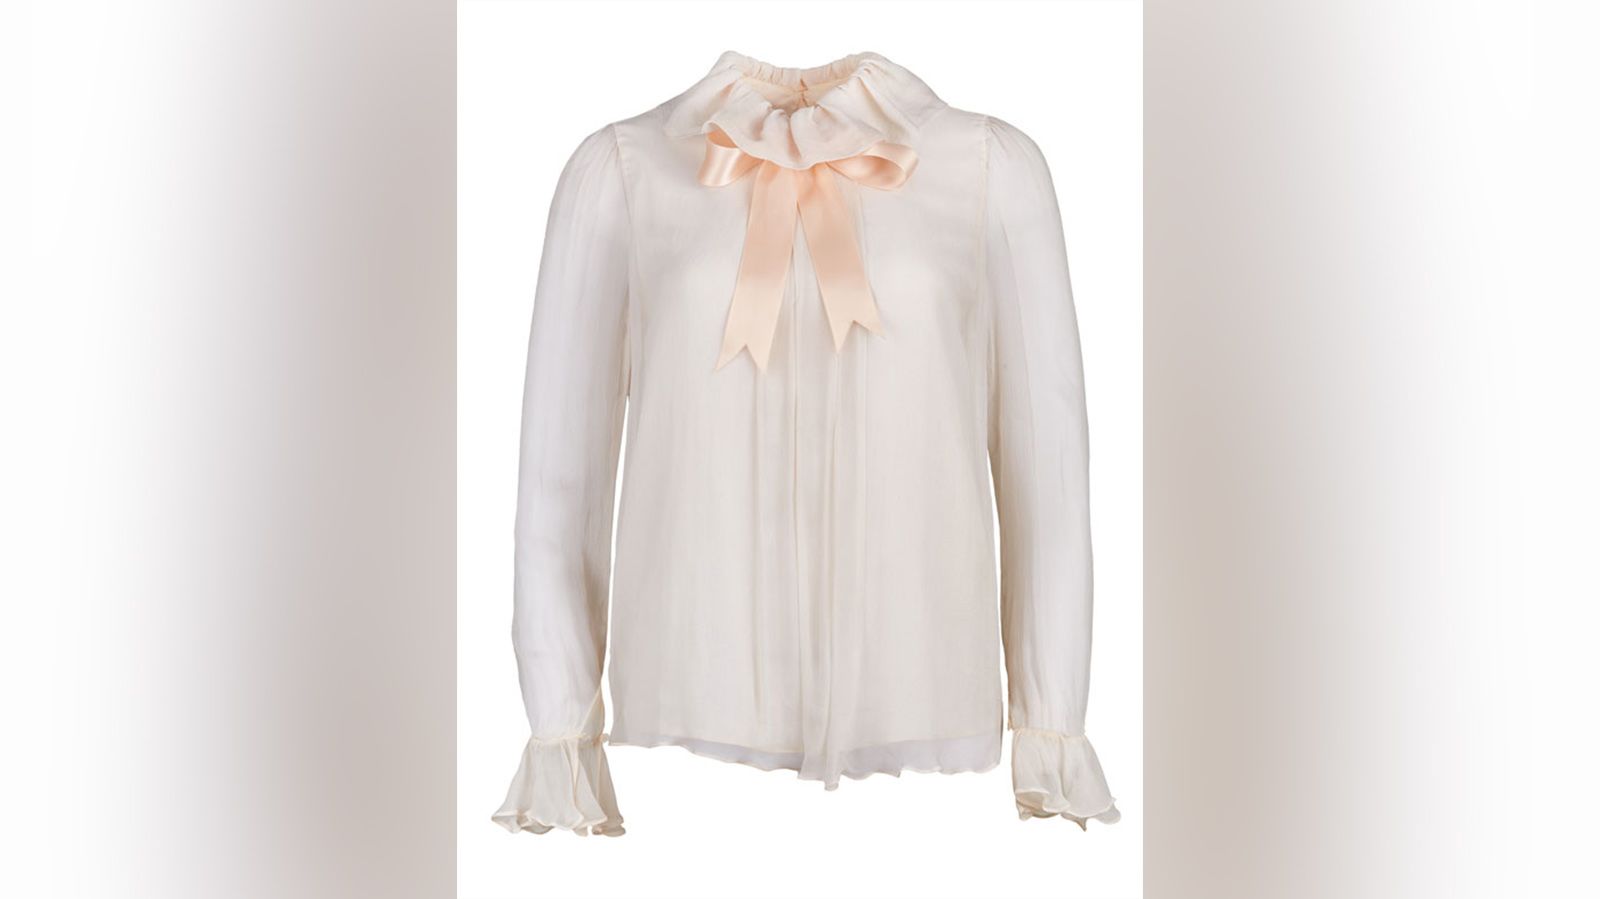 Diana wore the blouse for an engagement portrait taken by Lord Snowdon in 1981.